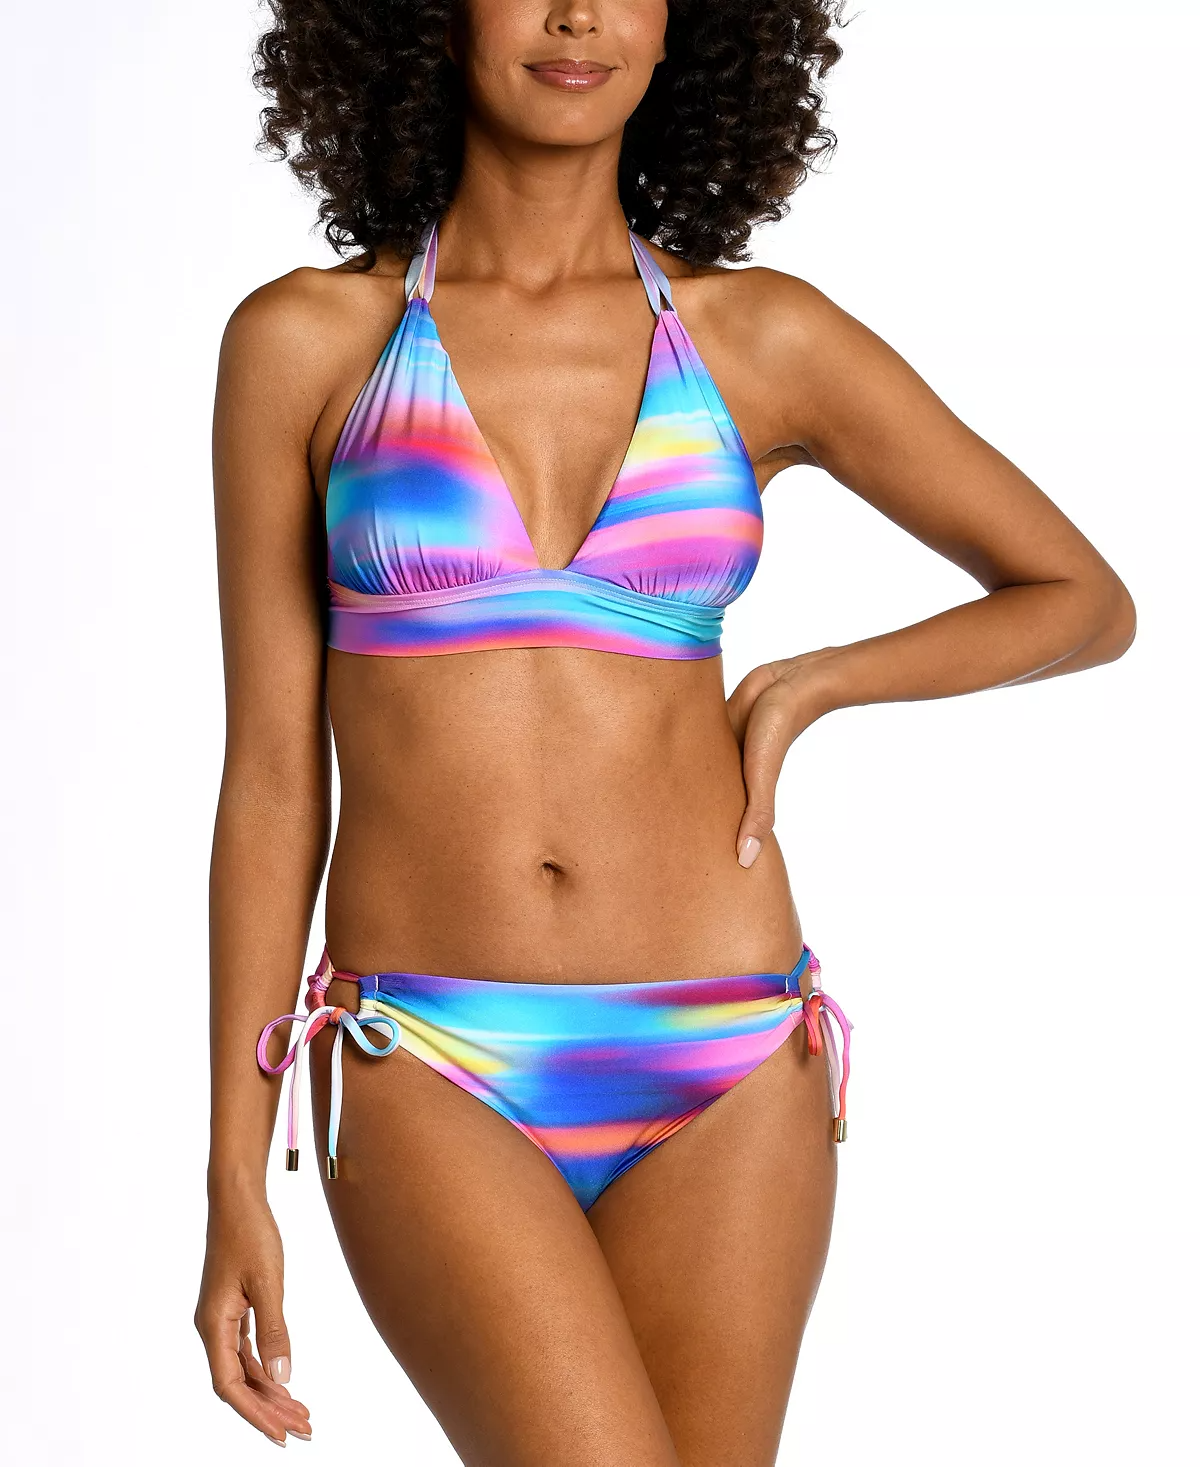 Hourglass Body Type Tie Front or Tie Side Bottom Swimsuit